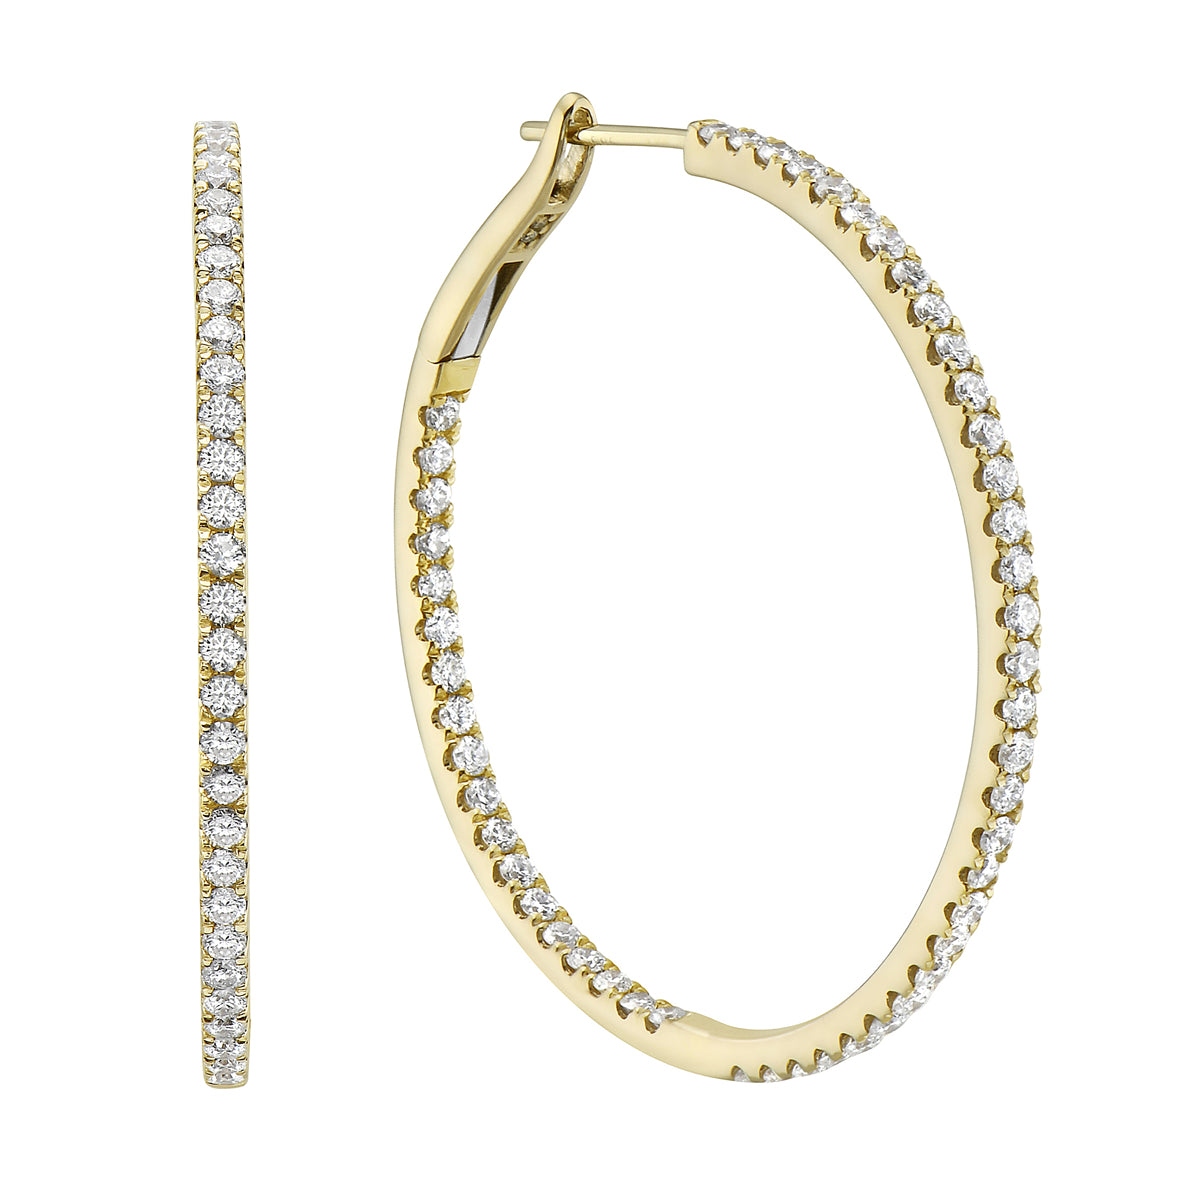 1.5in Yellow Gold Insdie and Out Diamond Hoop Earrings